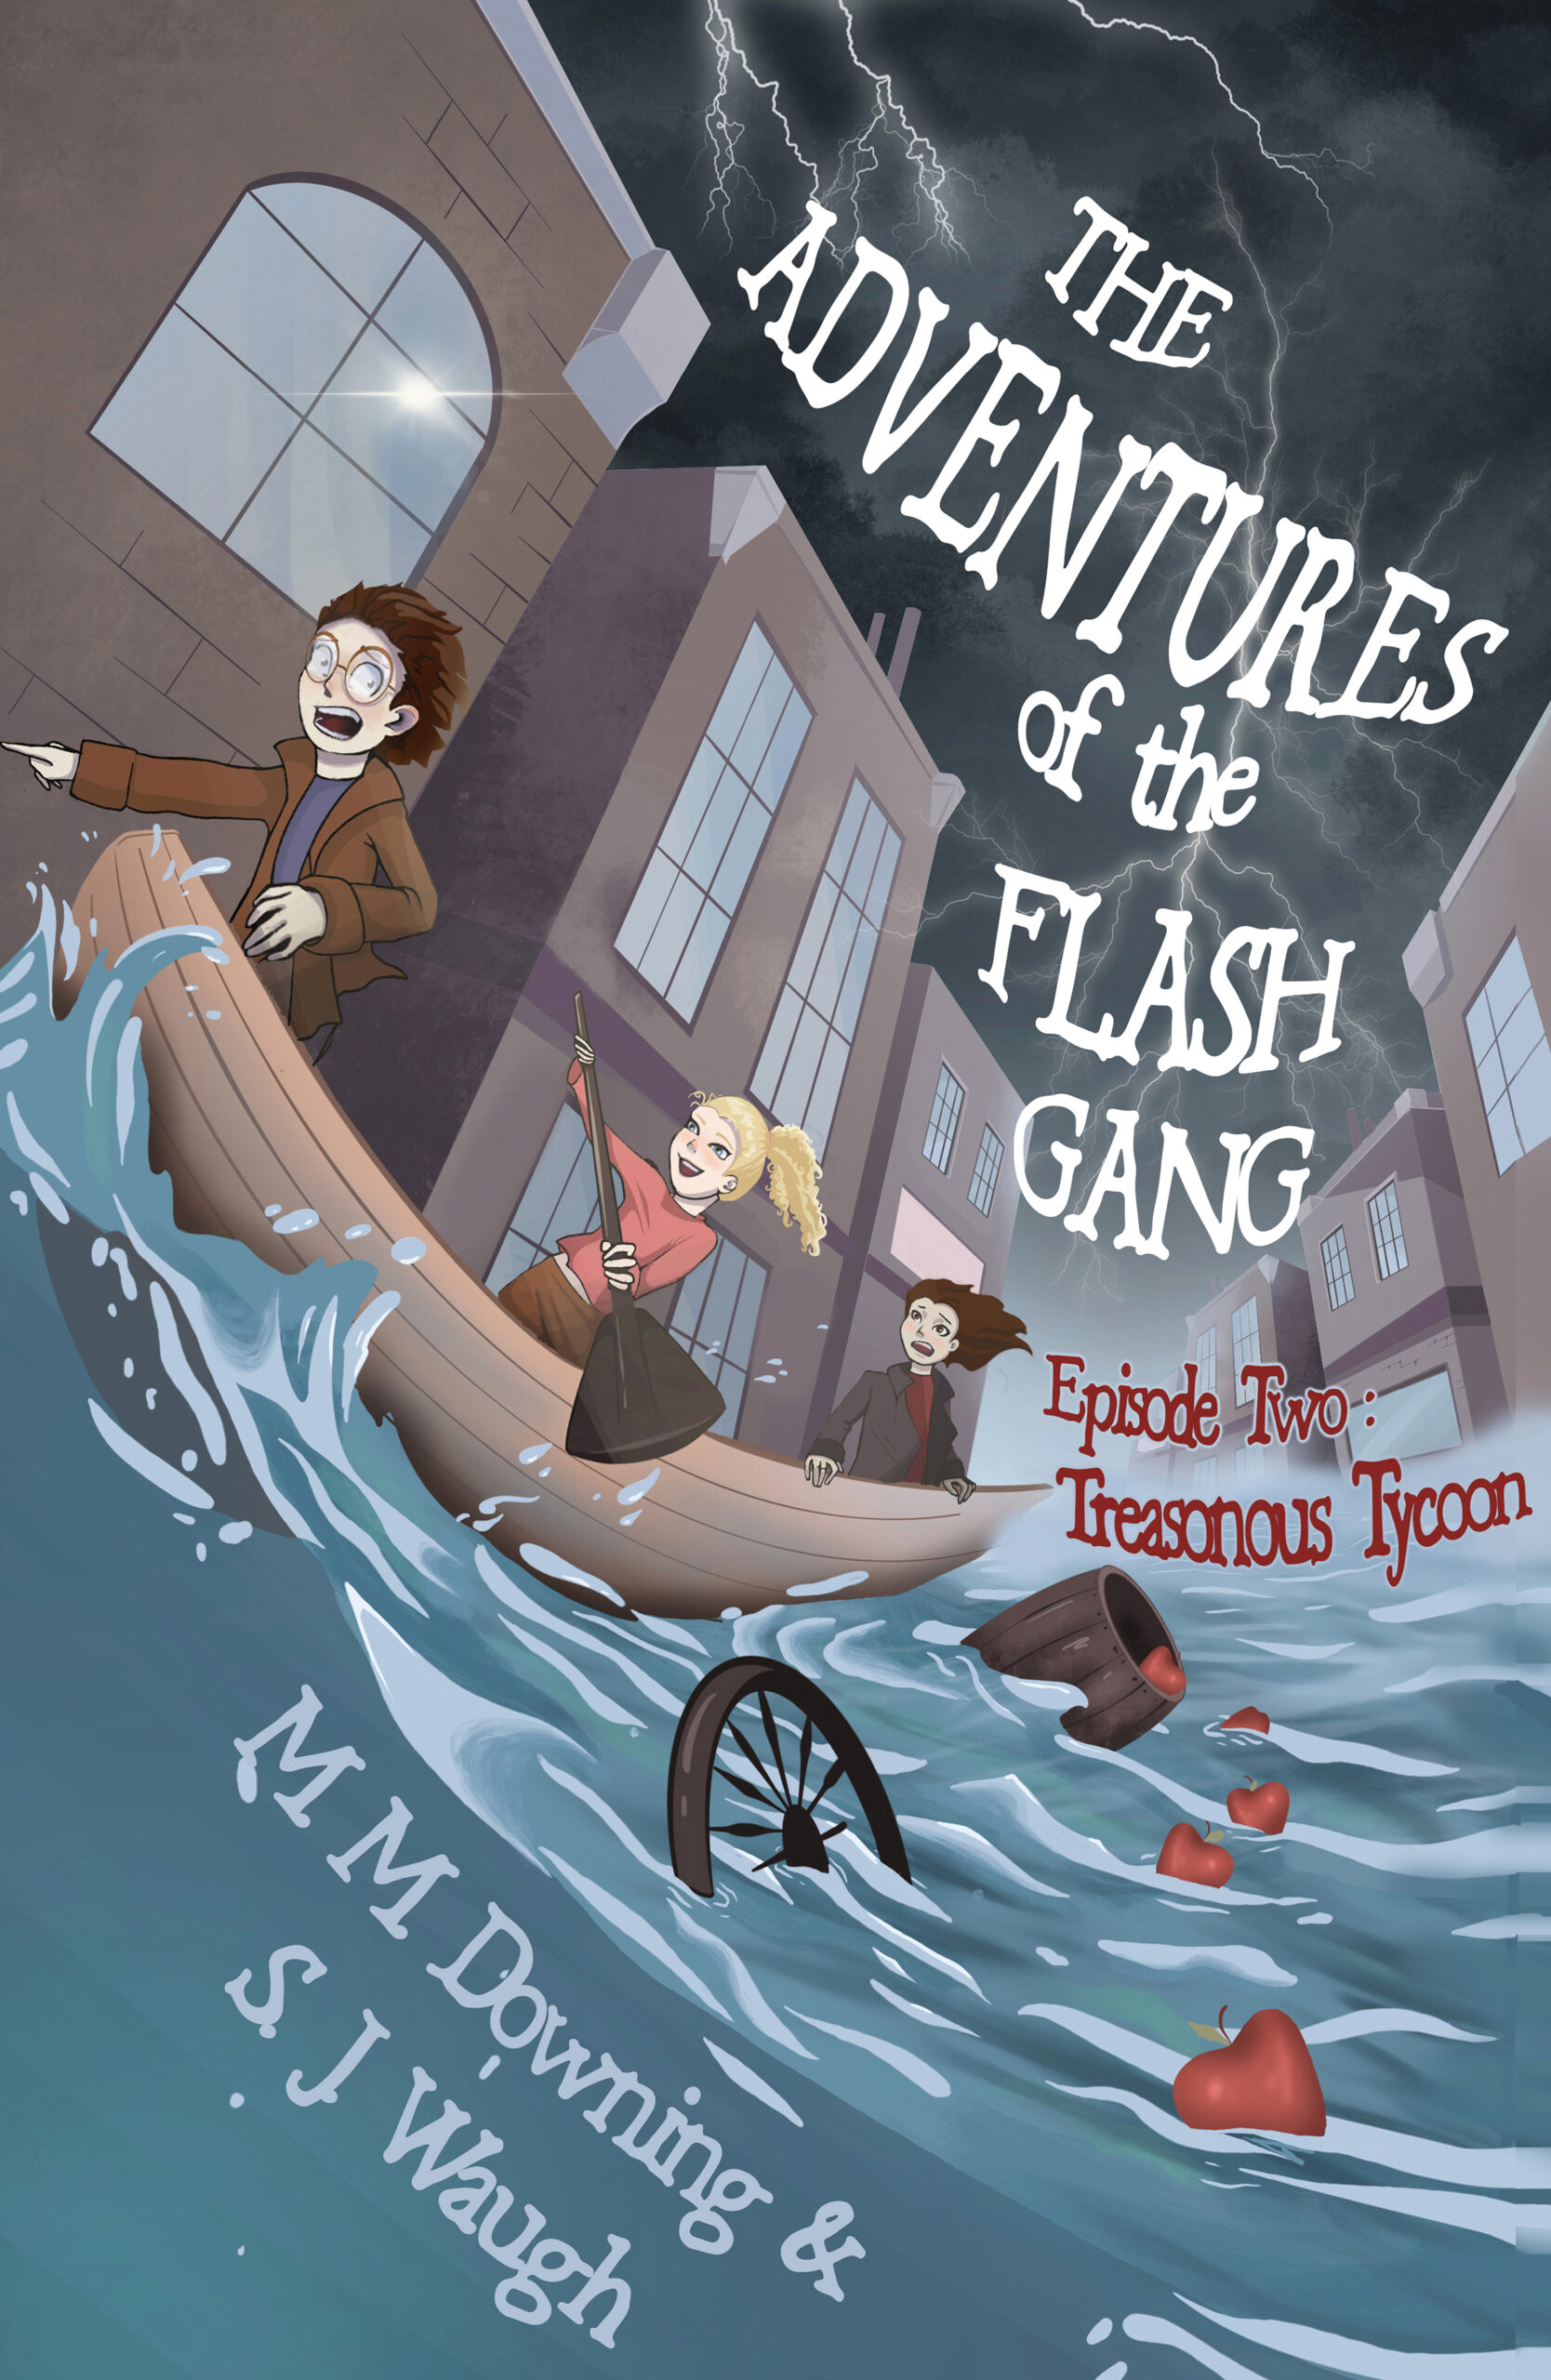 The Adventures of The Flash Gang. Episode Two: Treasonous Tycoon